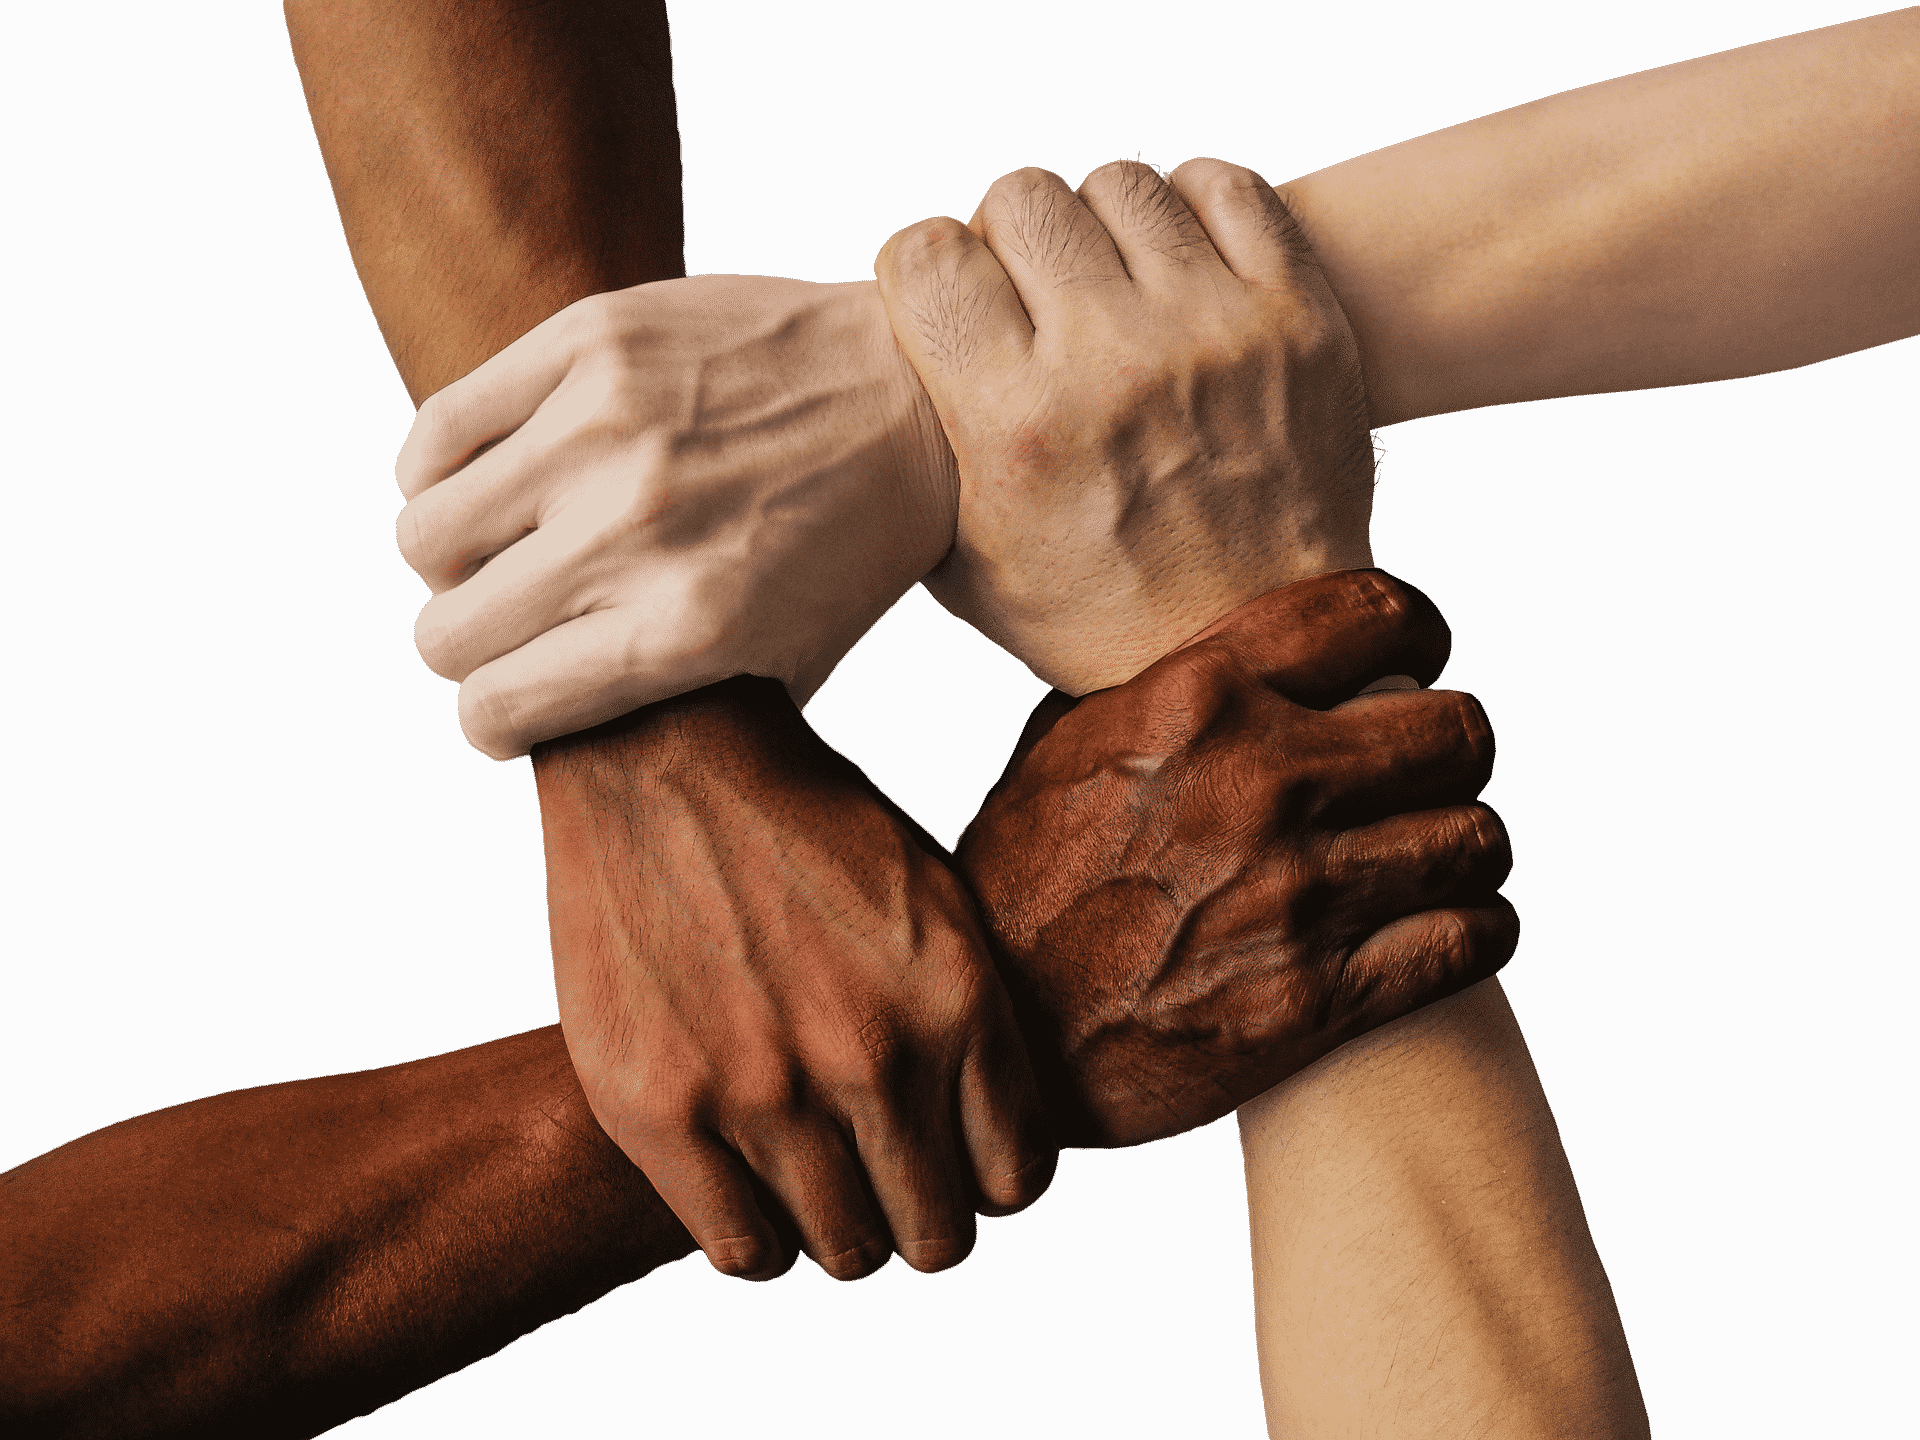 Diversity represented in people of different colors holding hands